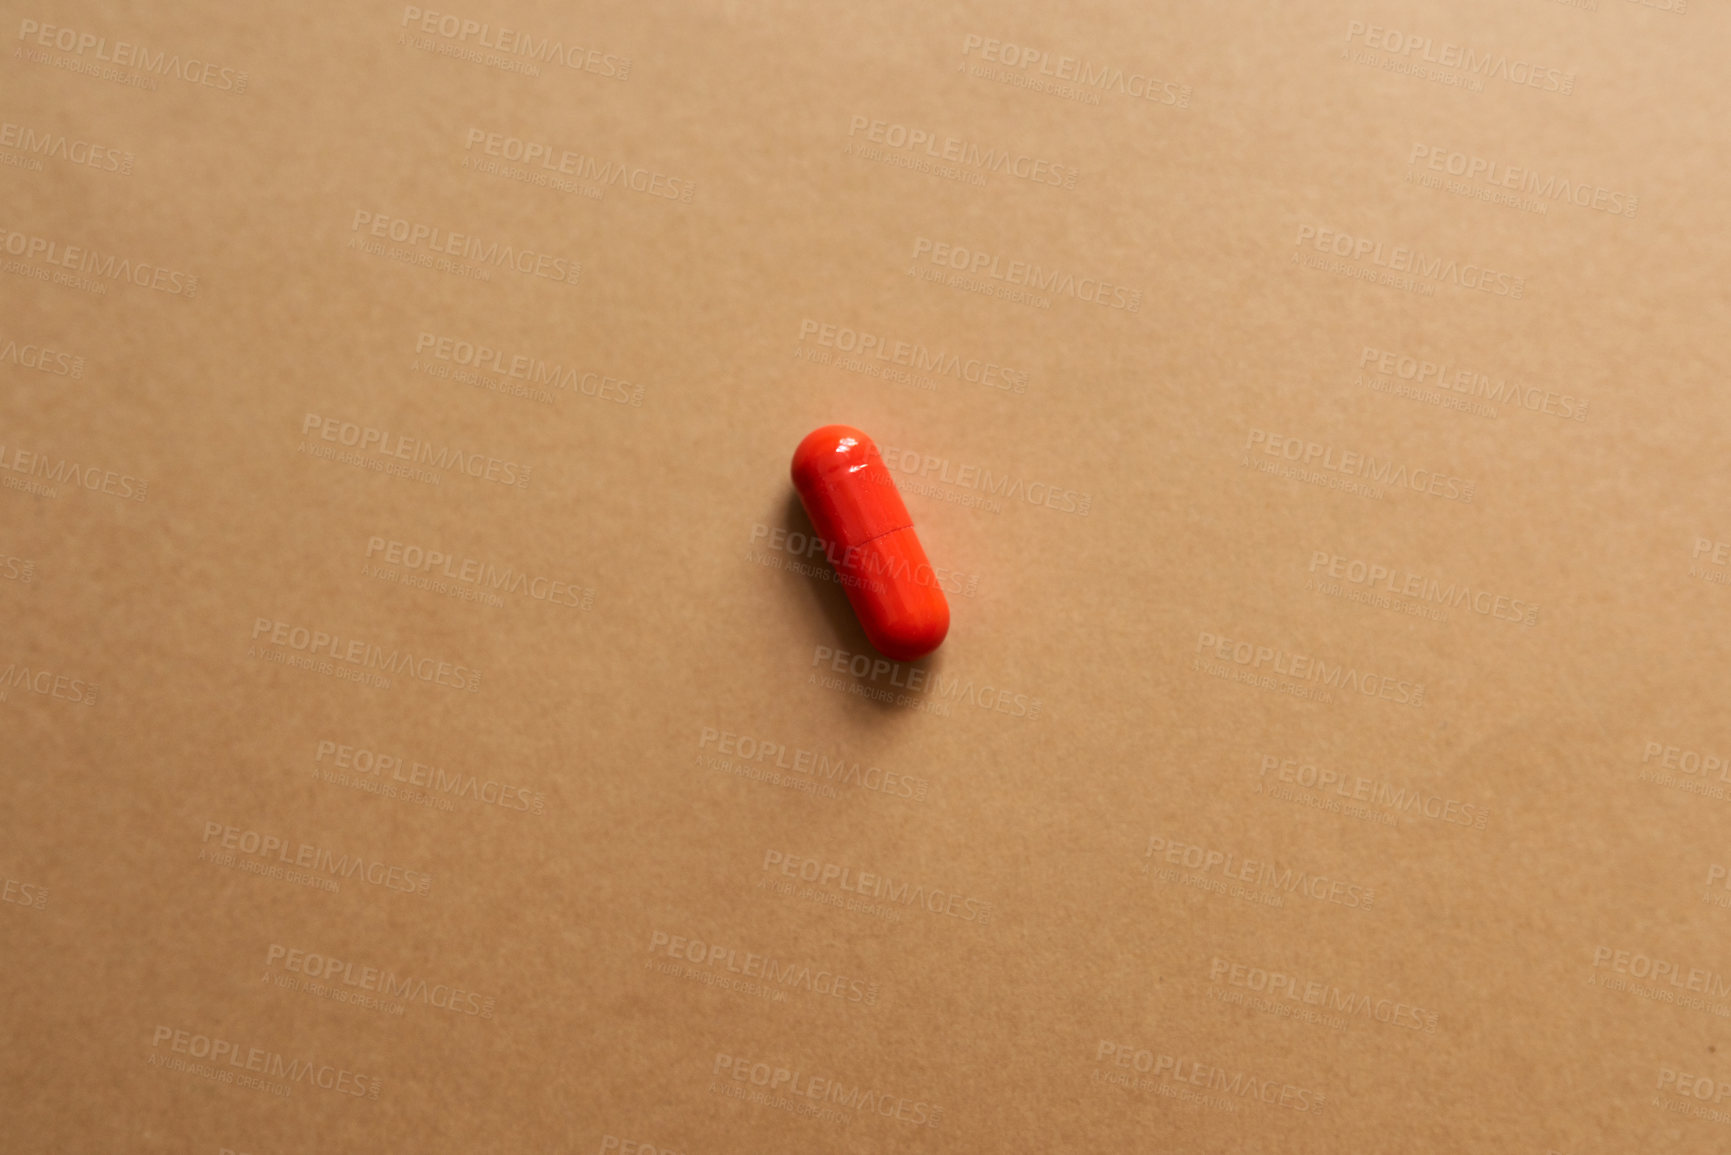 Buy stock photo Studio shot of a single red capsule against a brown background